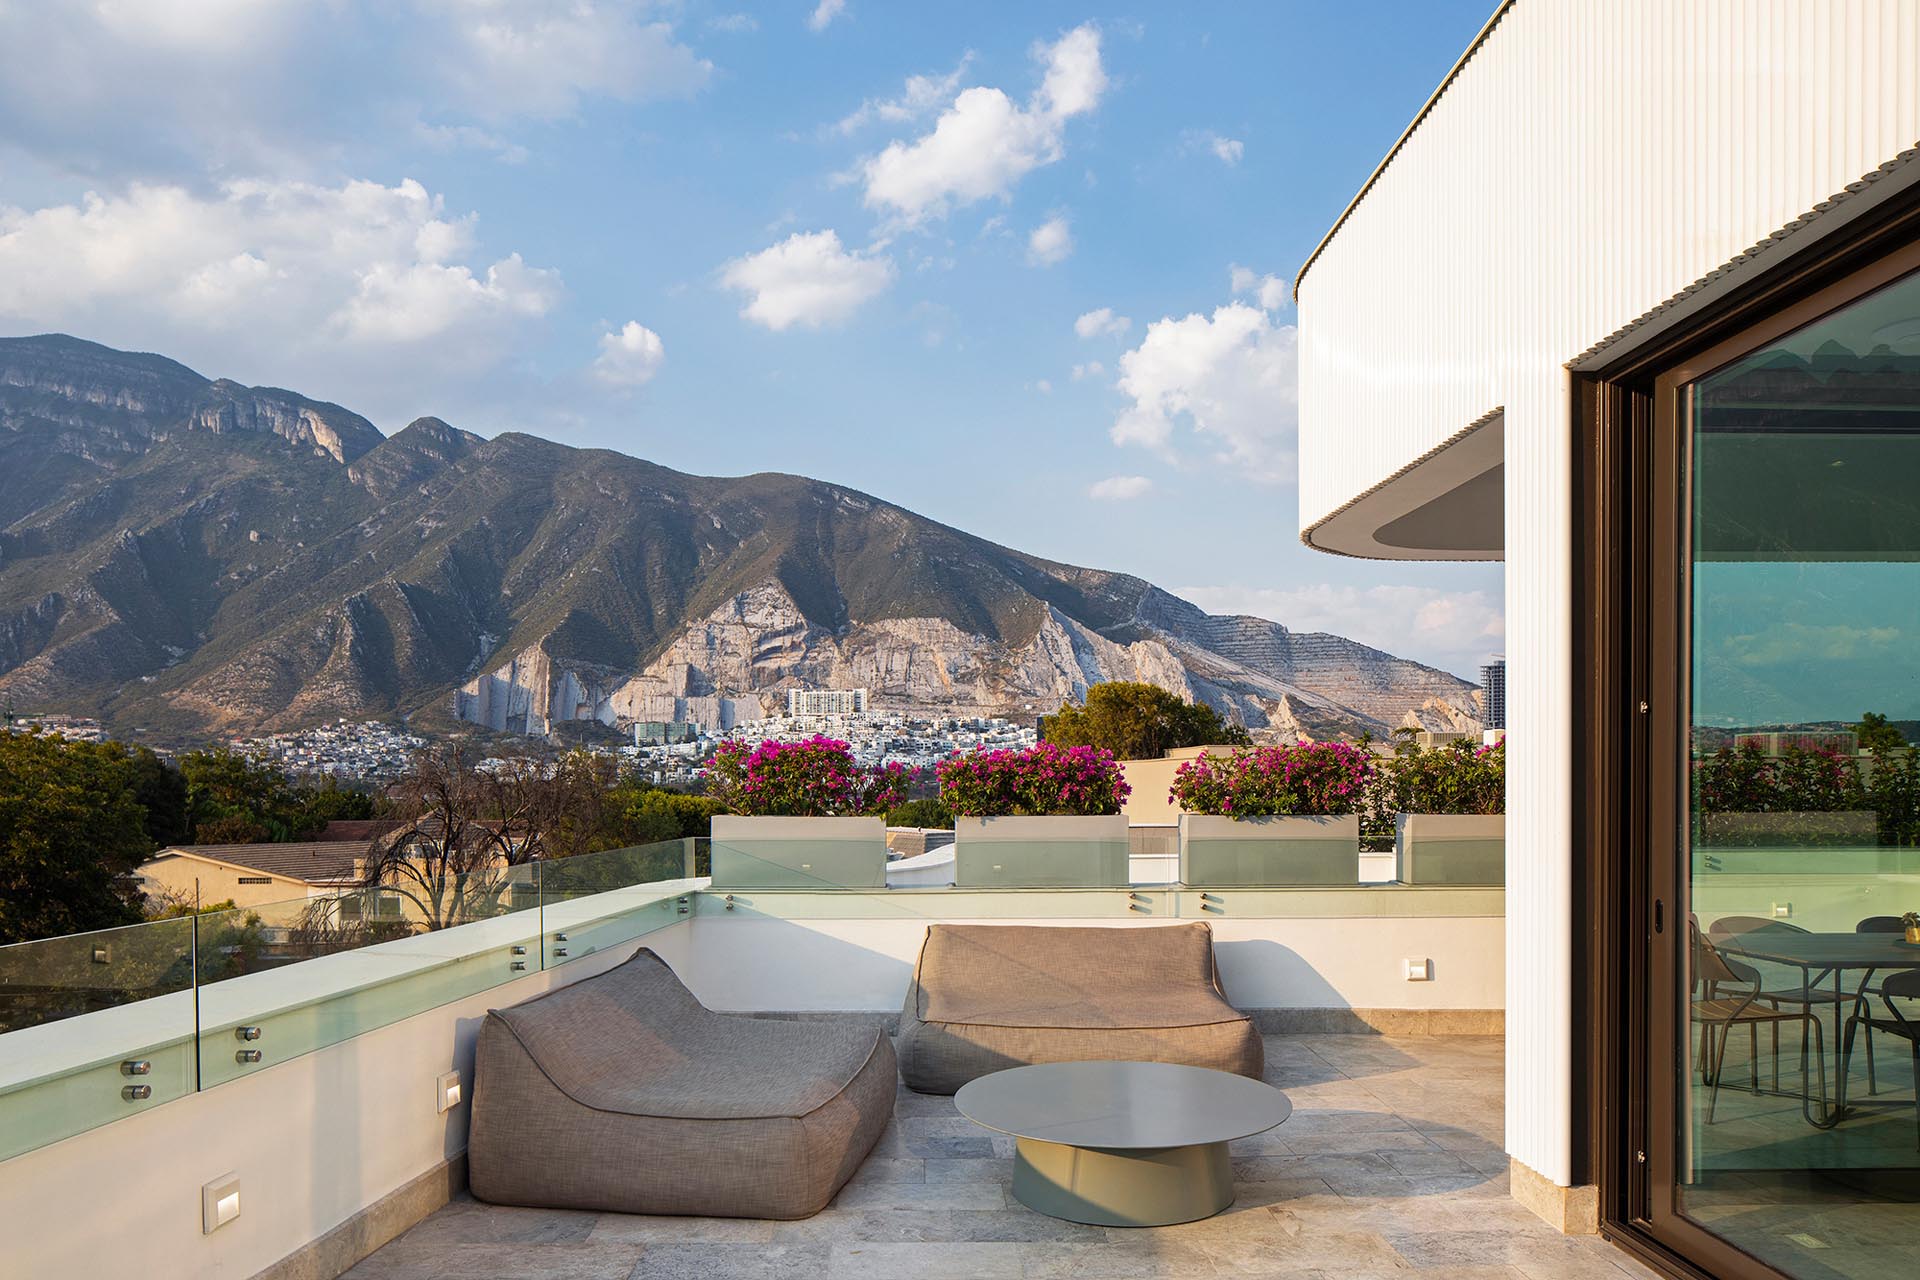 This modern rooftop terrace provides a relaxing place for mountain views.